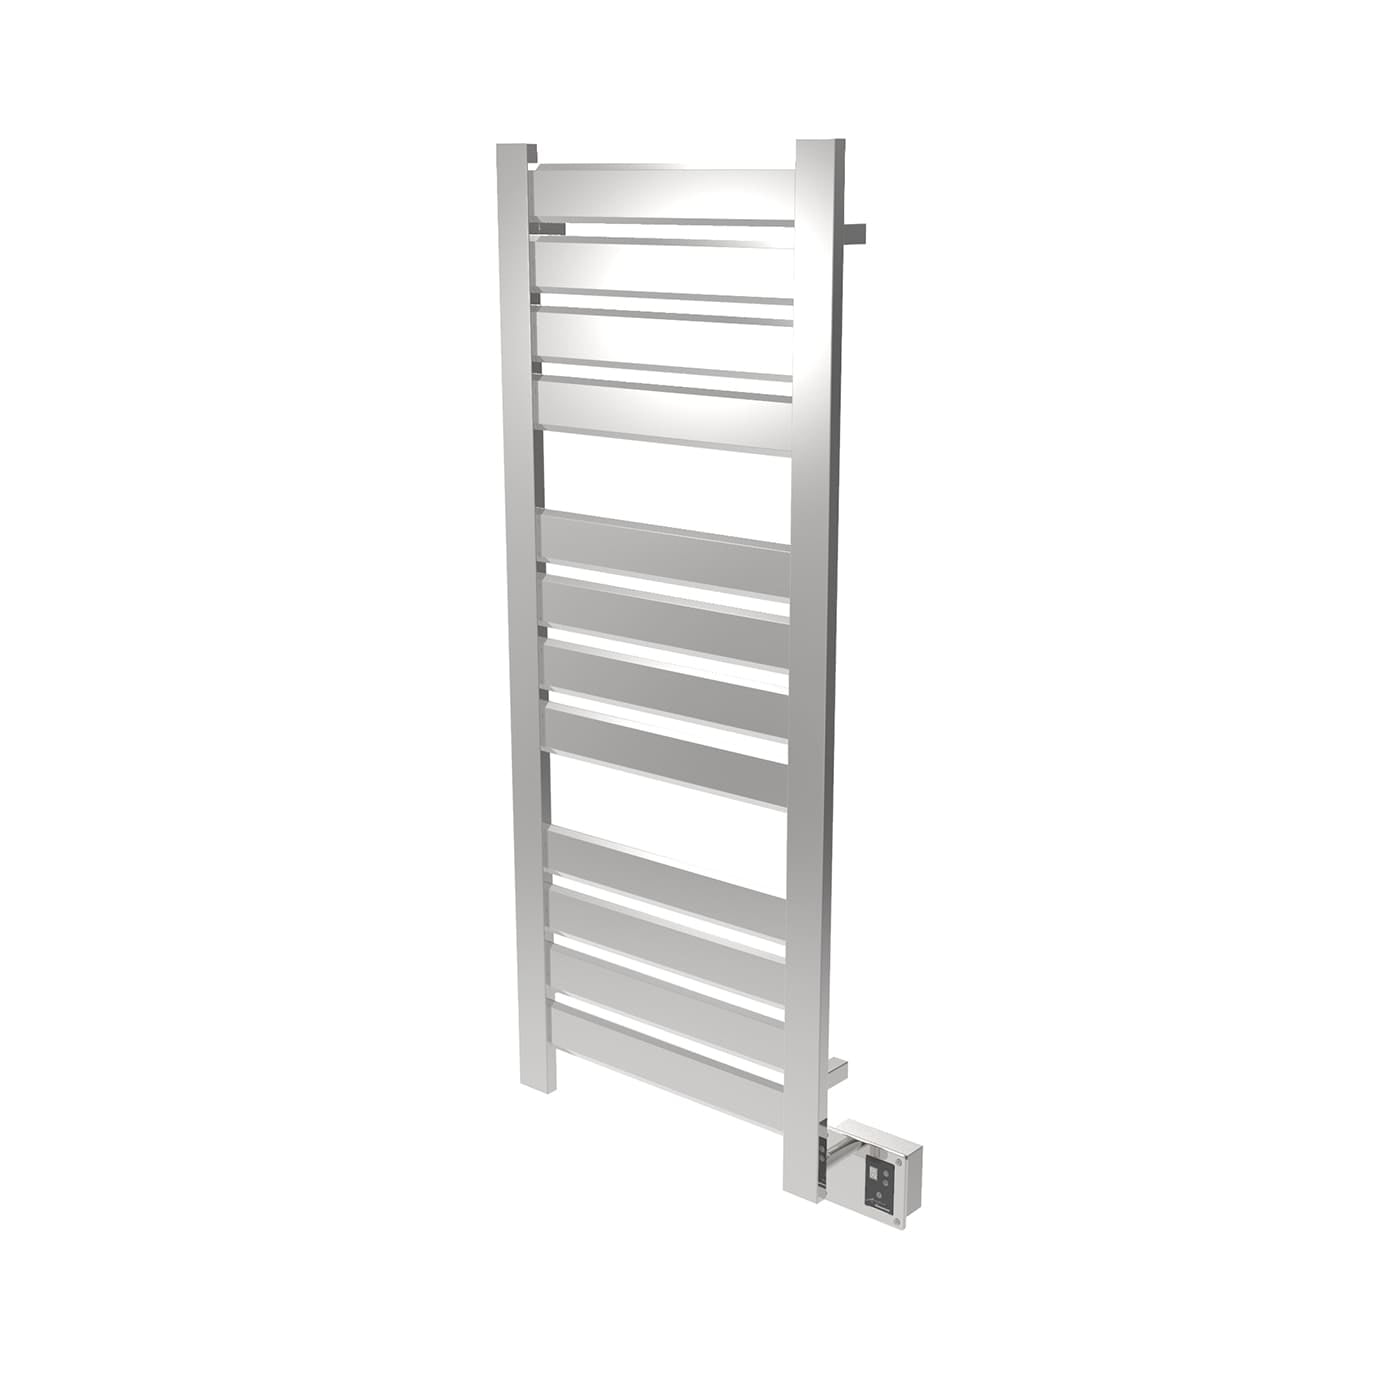 Picture of Amba V2356P 57.75 x 26.25 x 3.63 in. Towel Rack - Polished